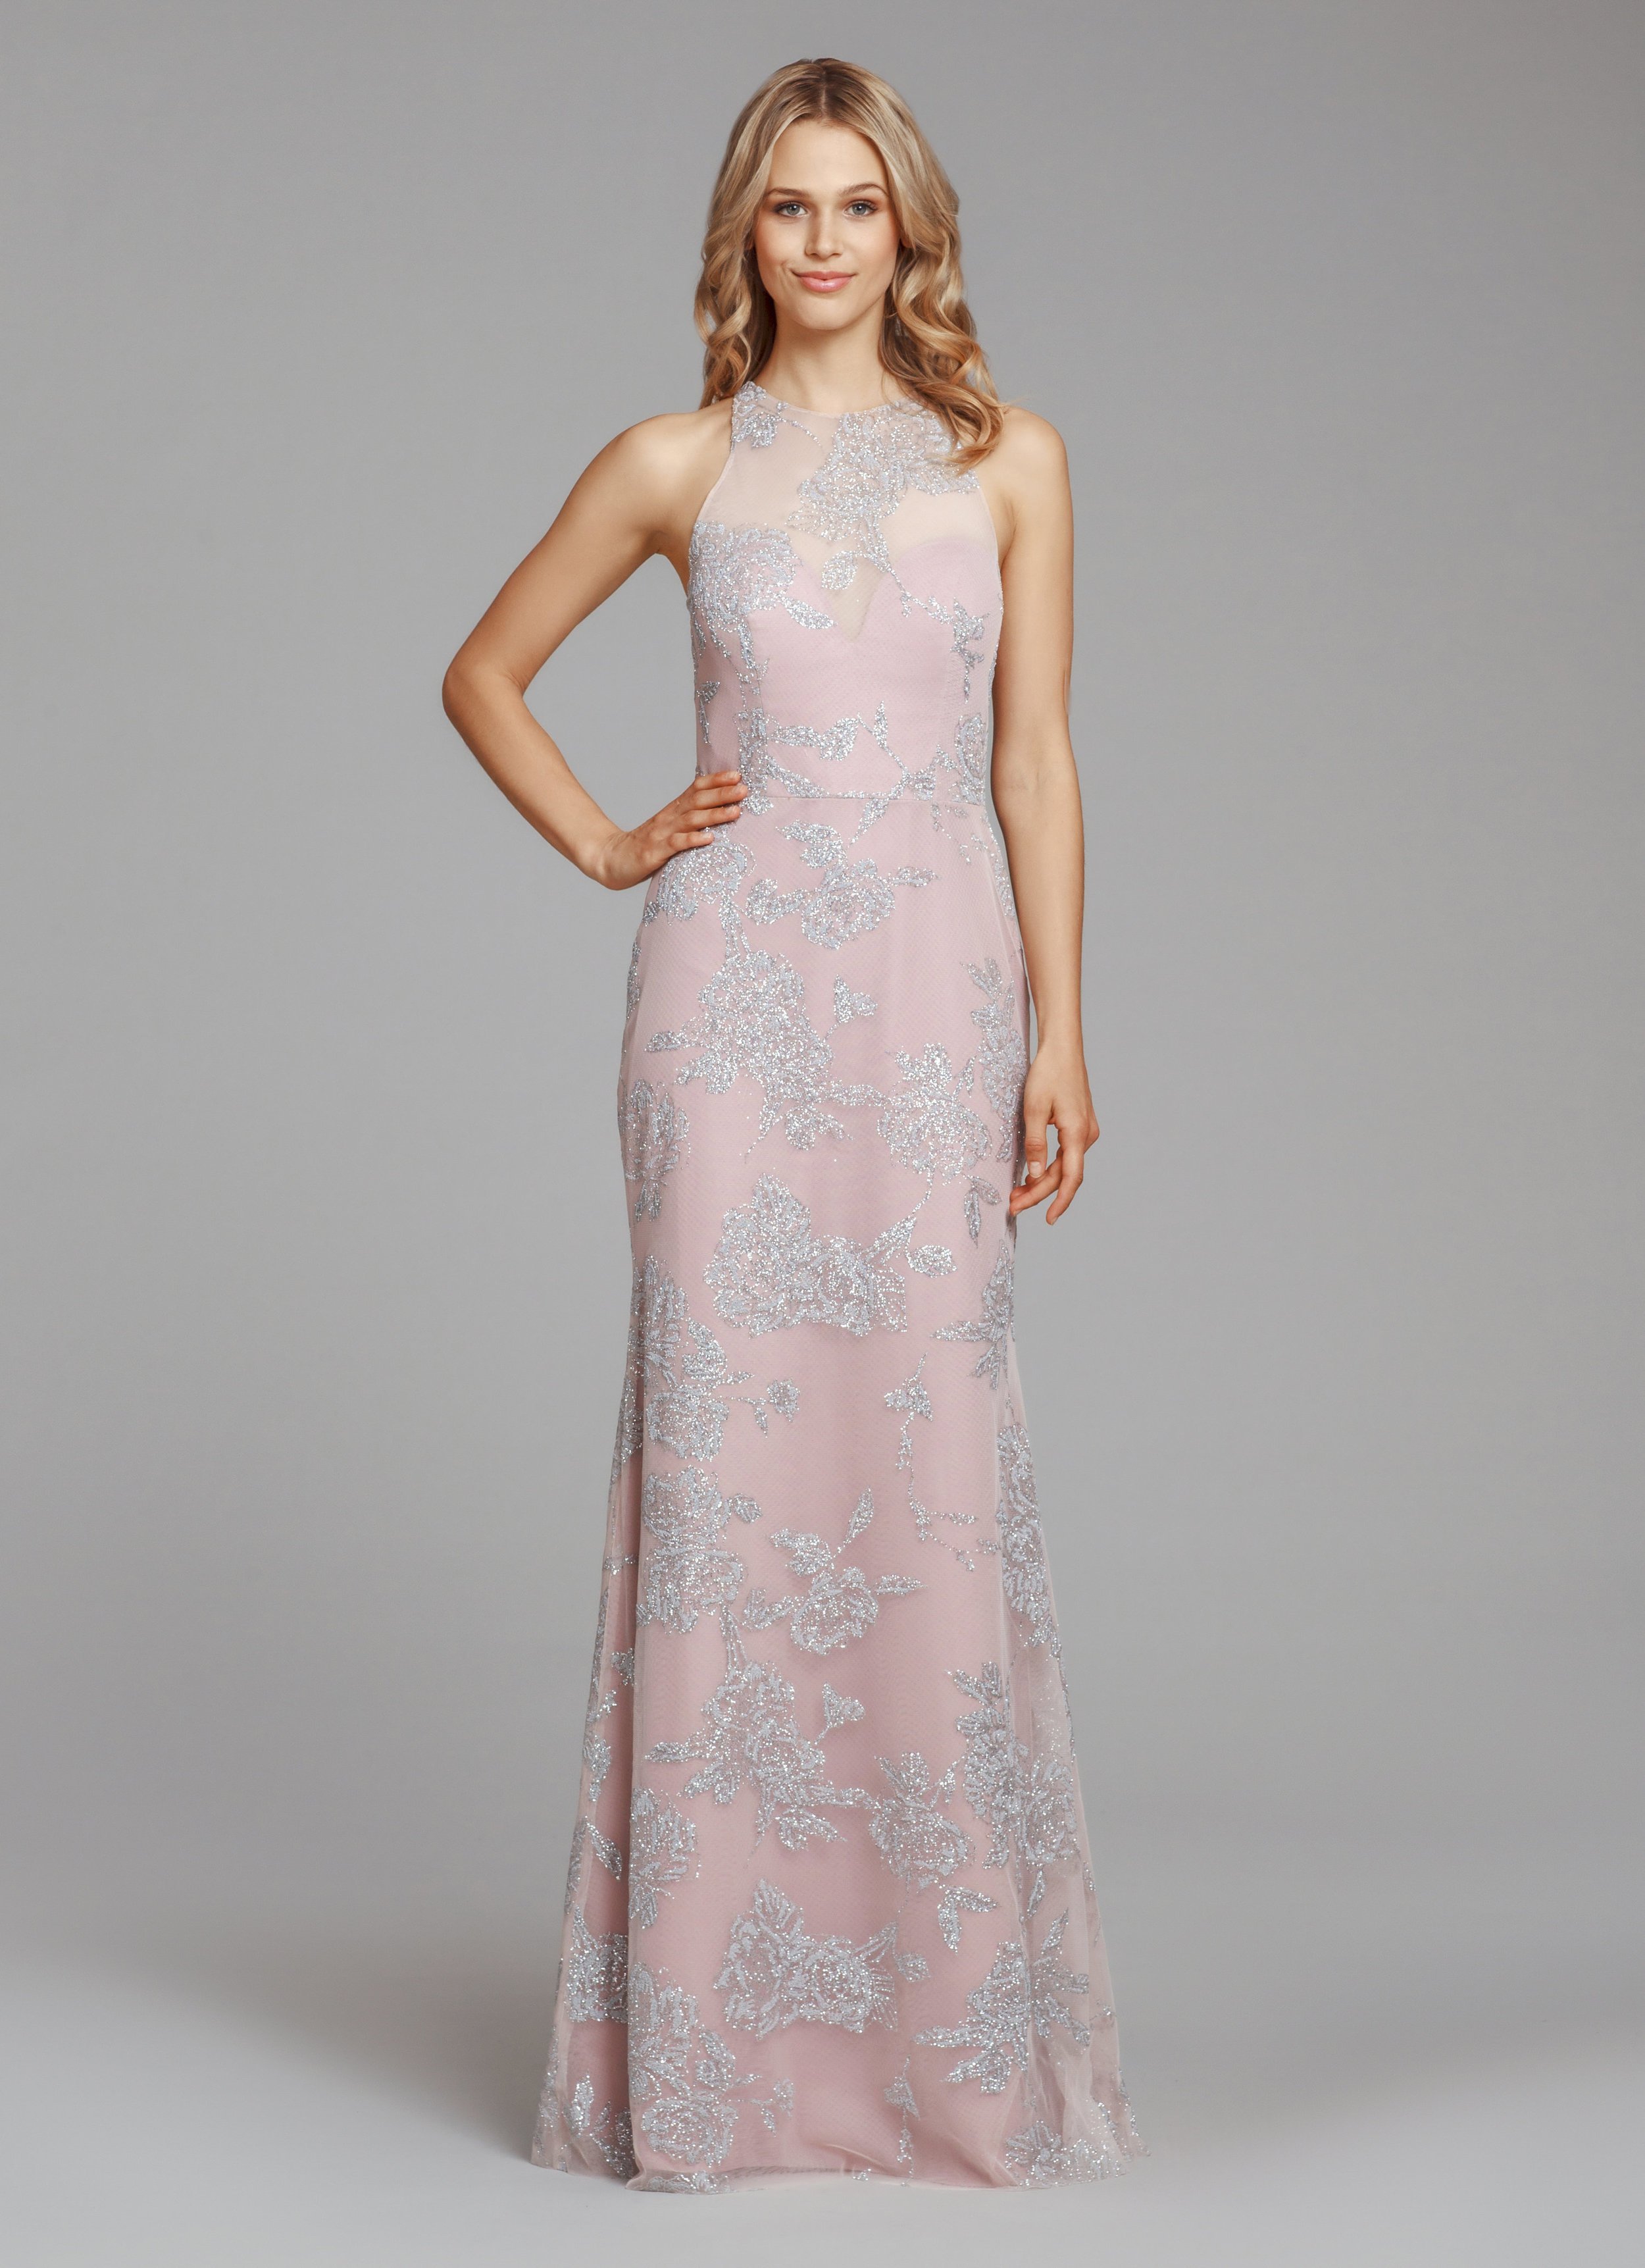 hayley-paige-occasions-bridesmaids-fall-2018-style-5853.jpg